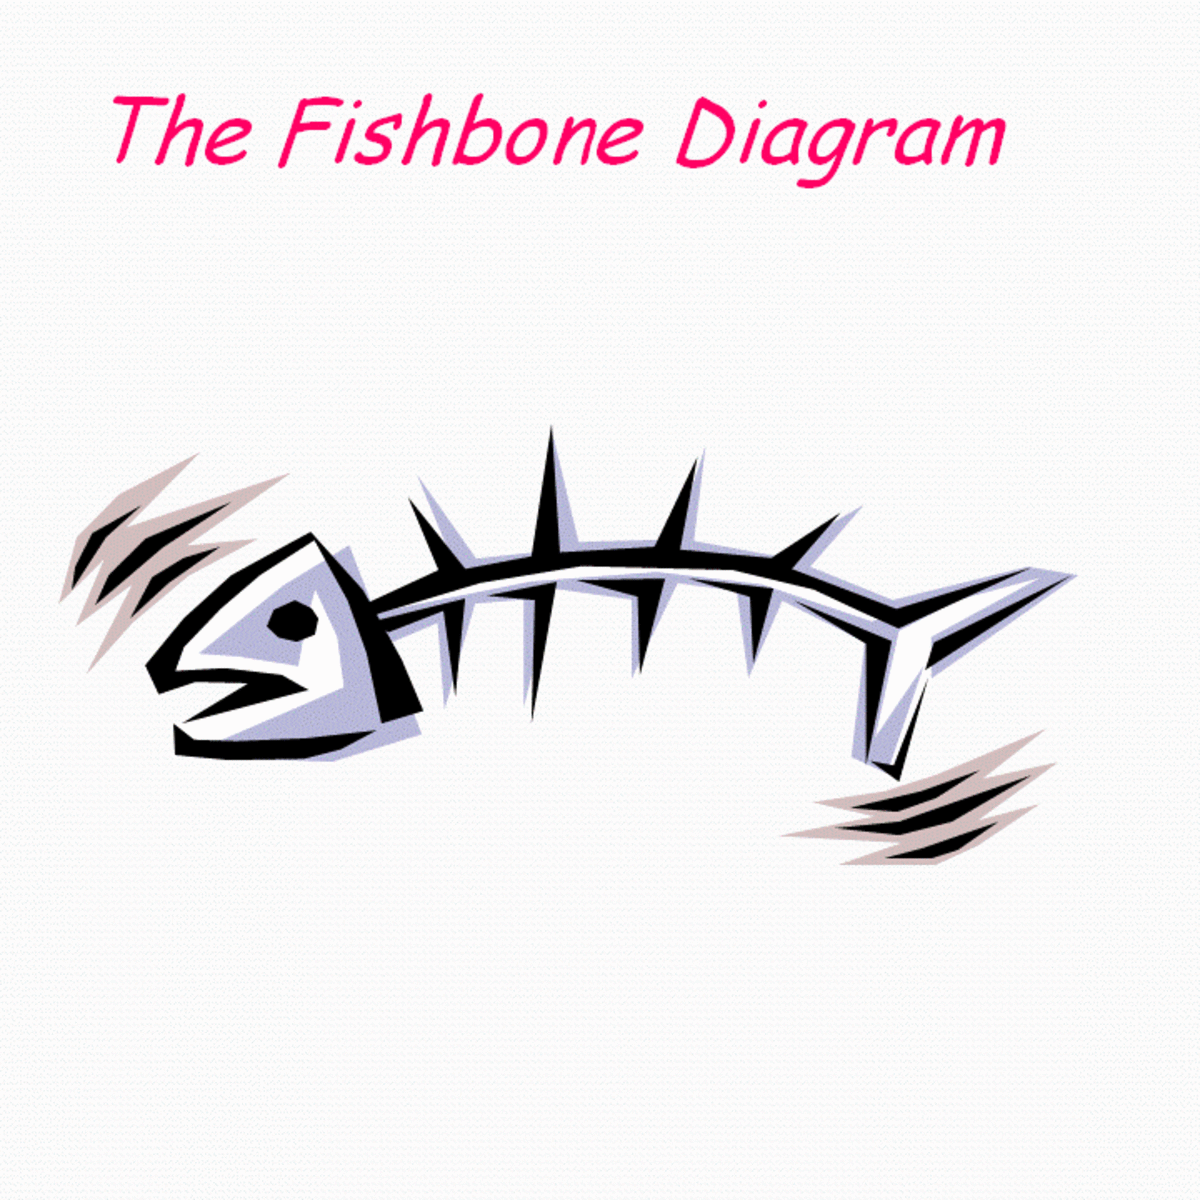 Ishikawa Fishbone Diagram; Cause and Effect; Continuous Process Improvement  - HubPages